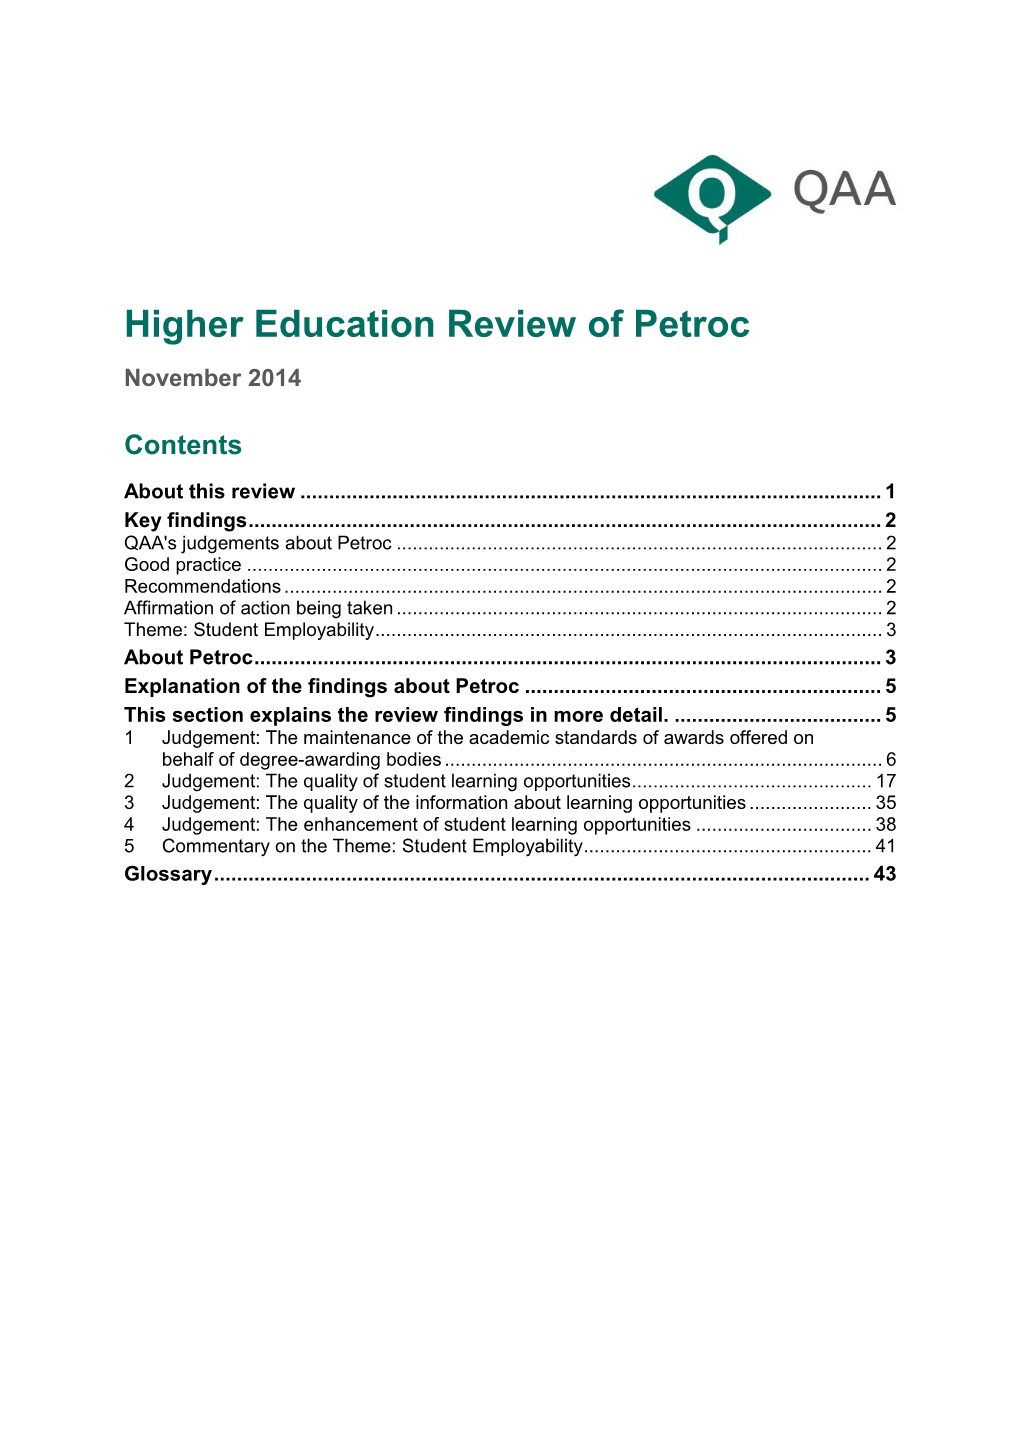 Higher Education Review: Petroc, November 2014